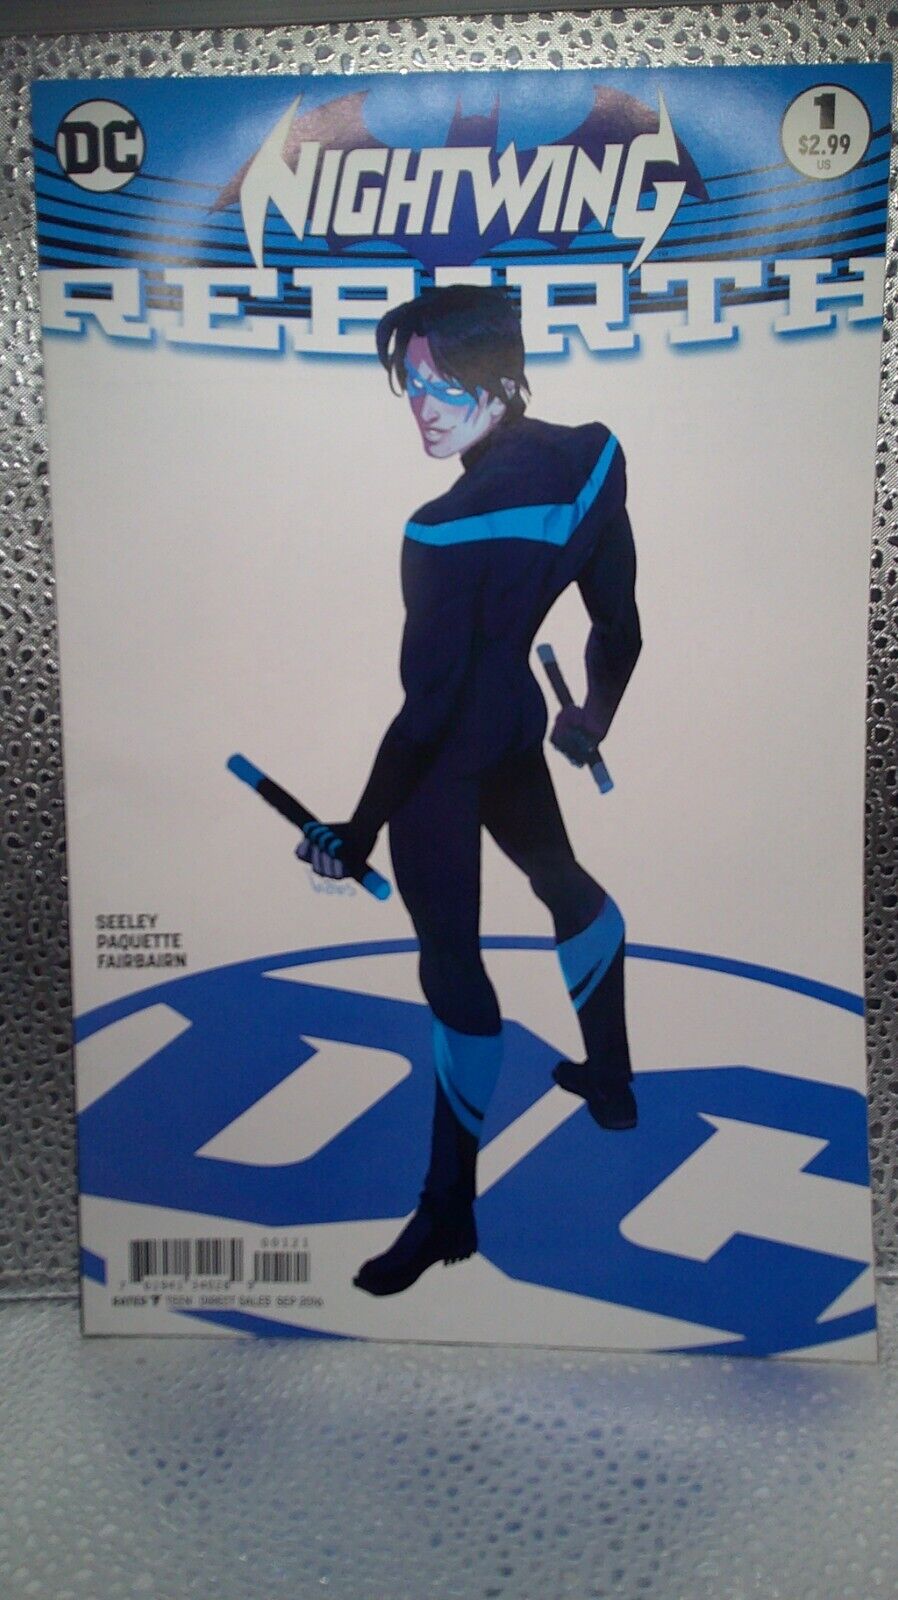 DC Comics NIGHTWING REBIRTH #1 first printing Babs Tarr cover B variant